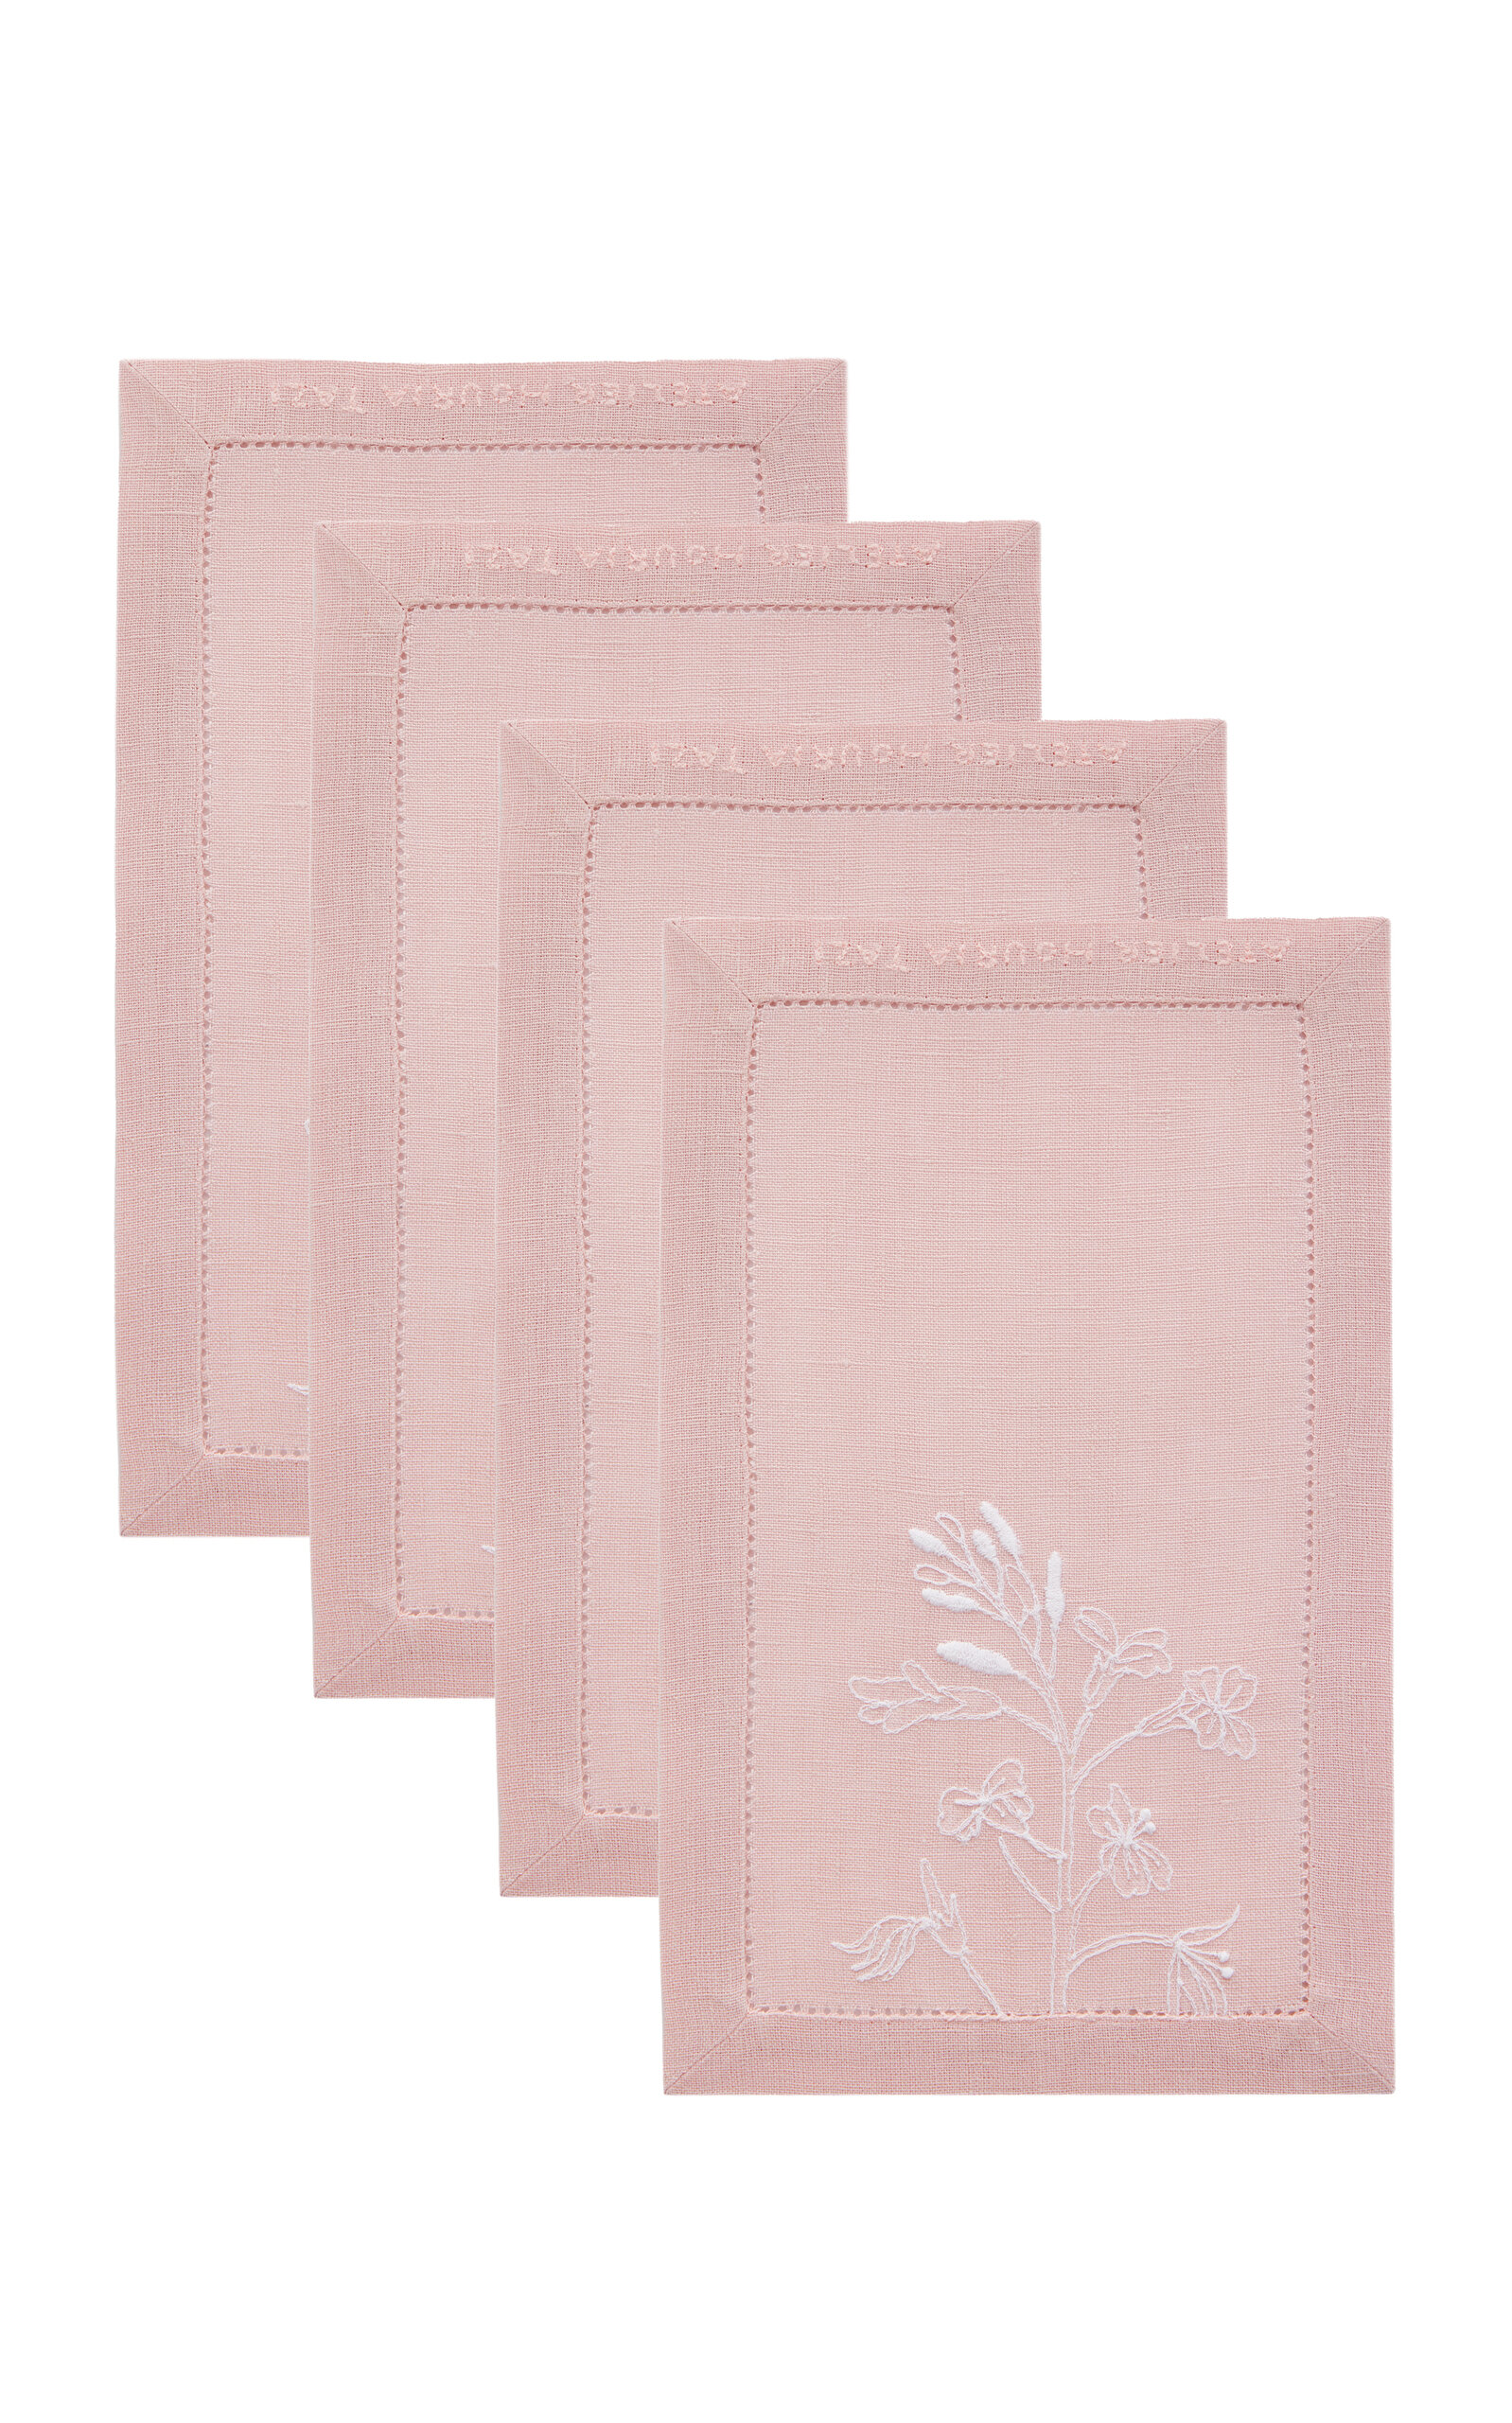 Atelier Houria Tazi Laure Set-of-four Cocktail Napkins In Pink